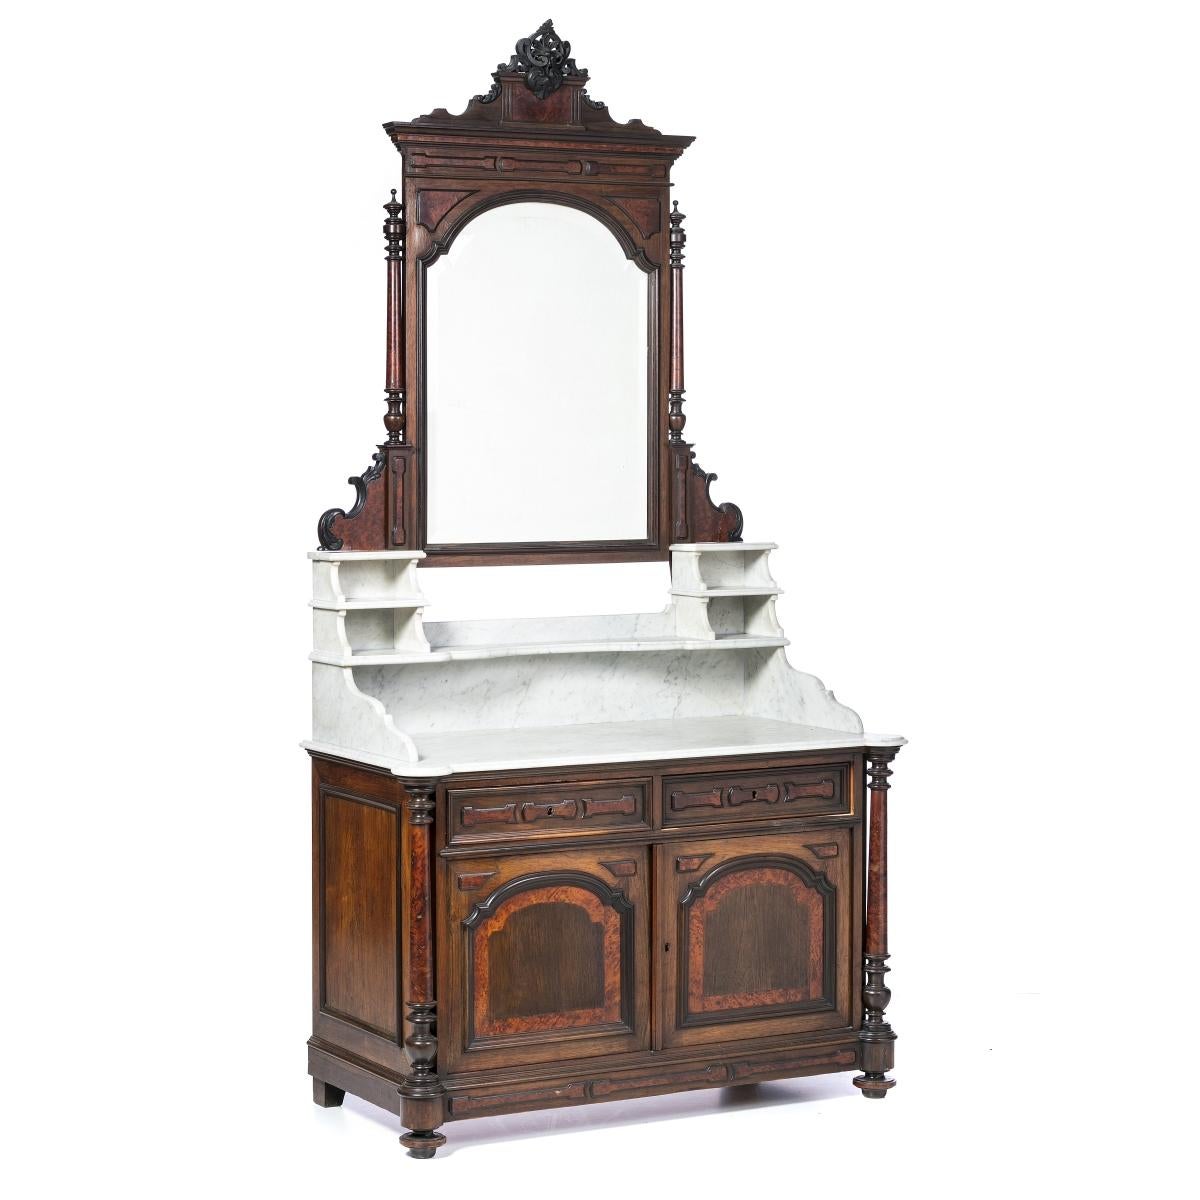 English washbasin dresser
19th century
in holy wood and 